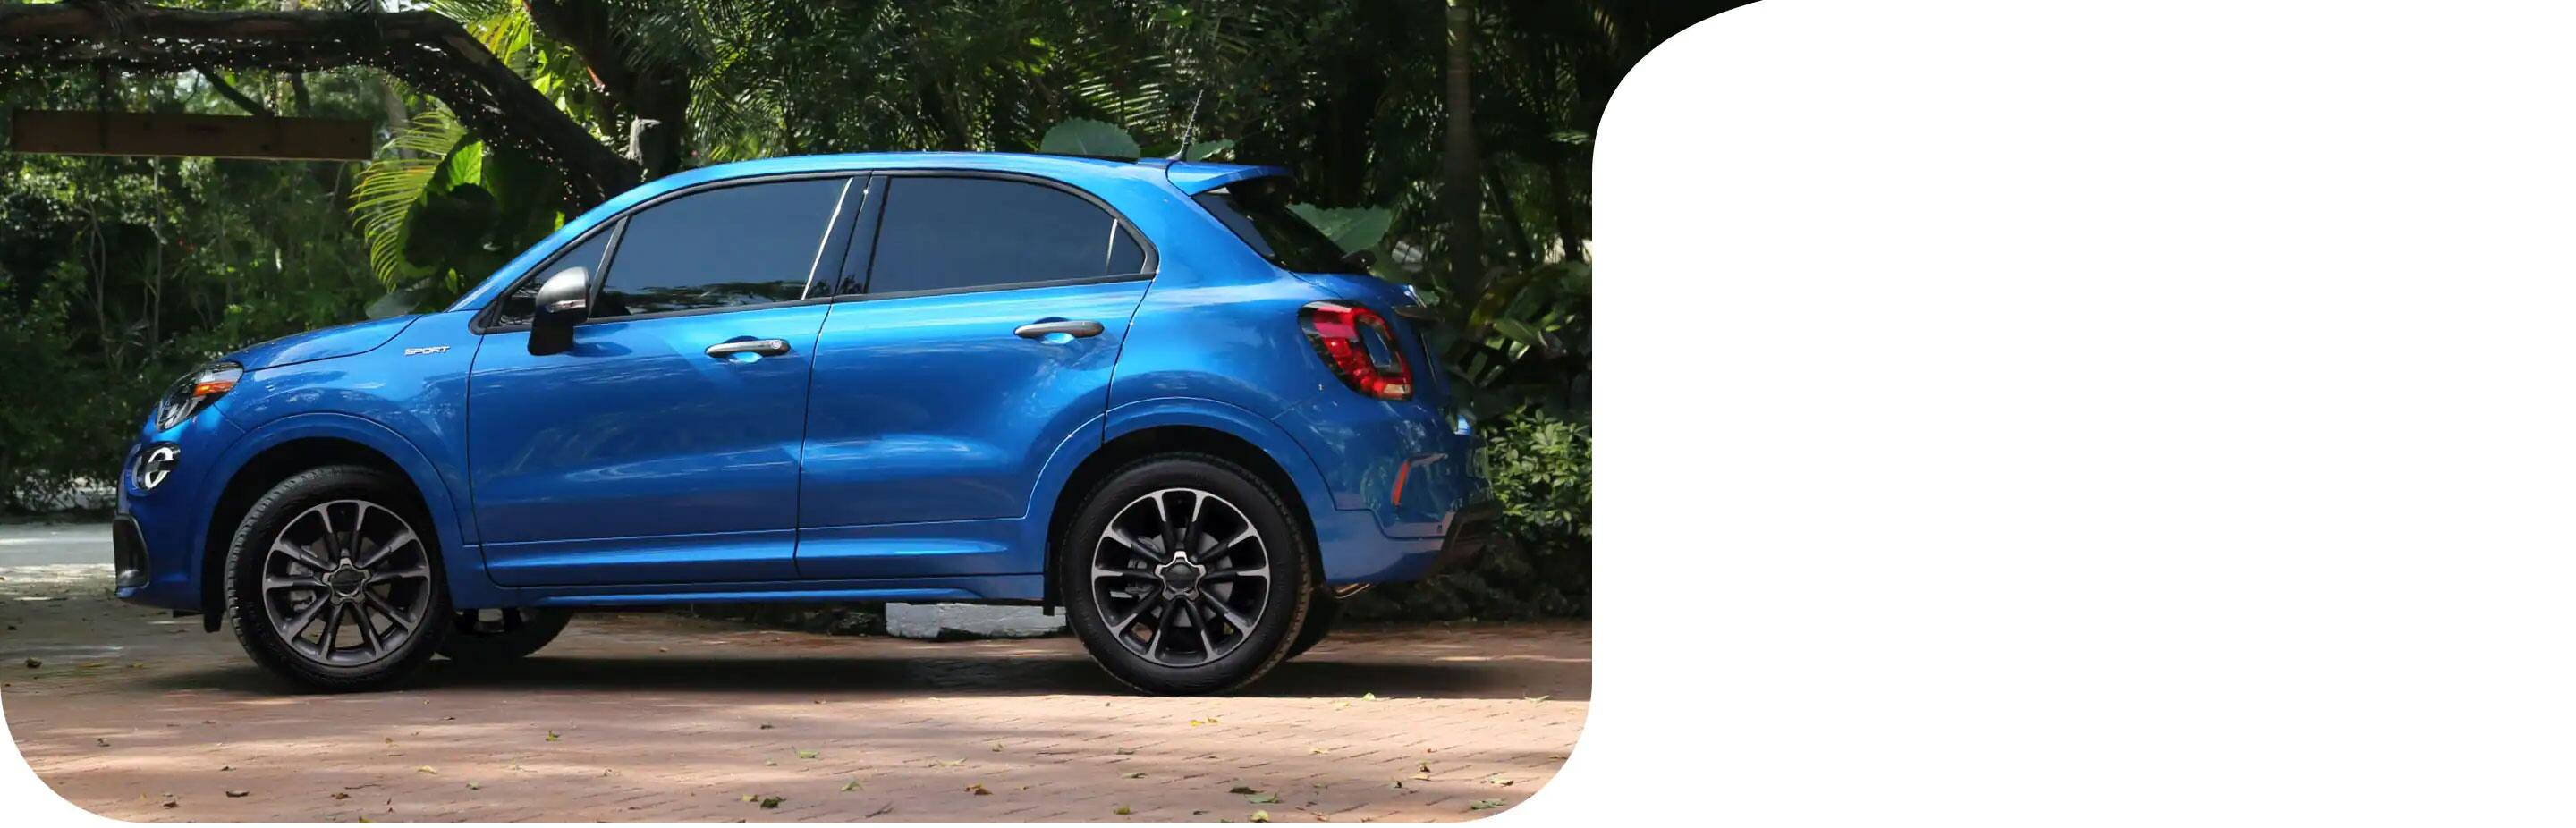 A profile view of a blue 2021 Fiat 500X Sport parked in a residential neighborhood beside a lush garden.